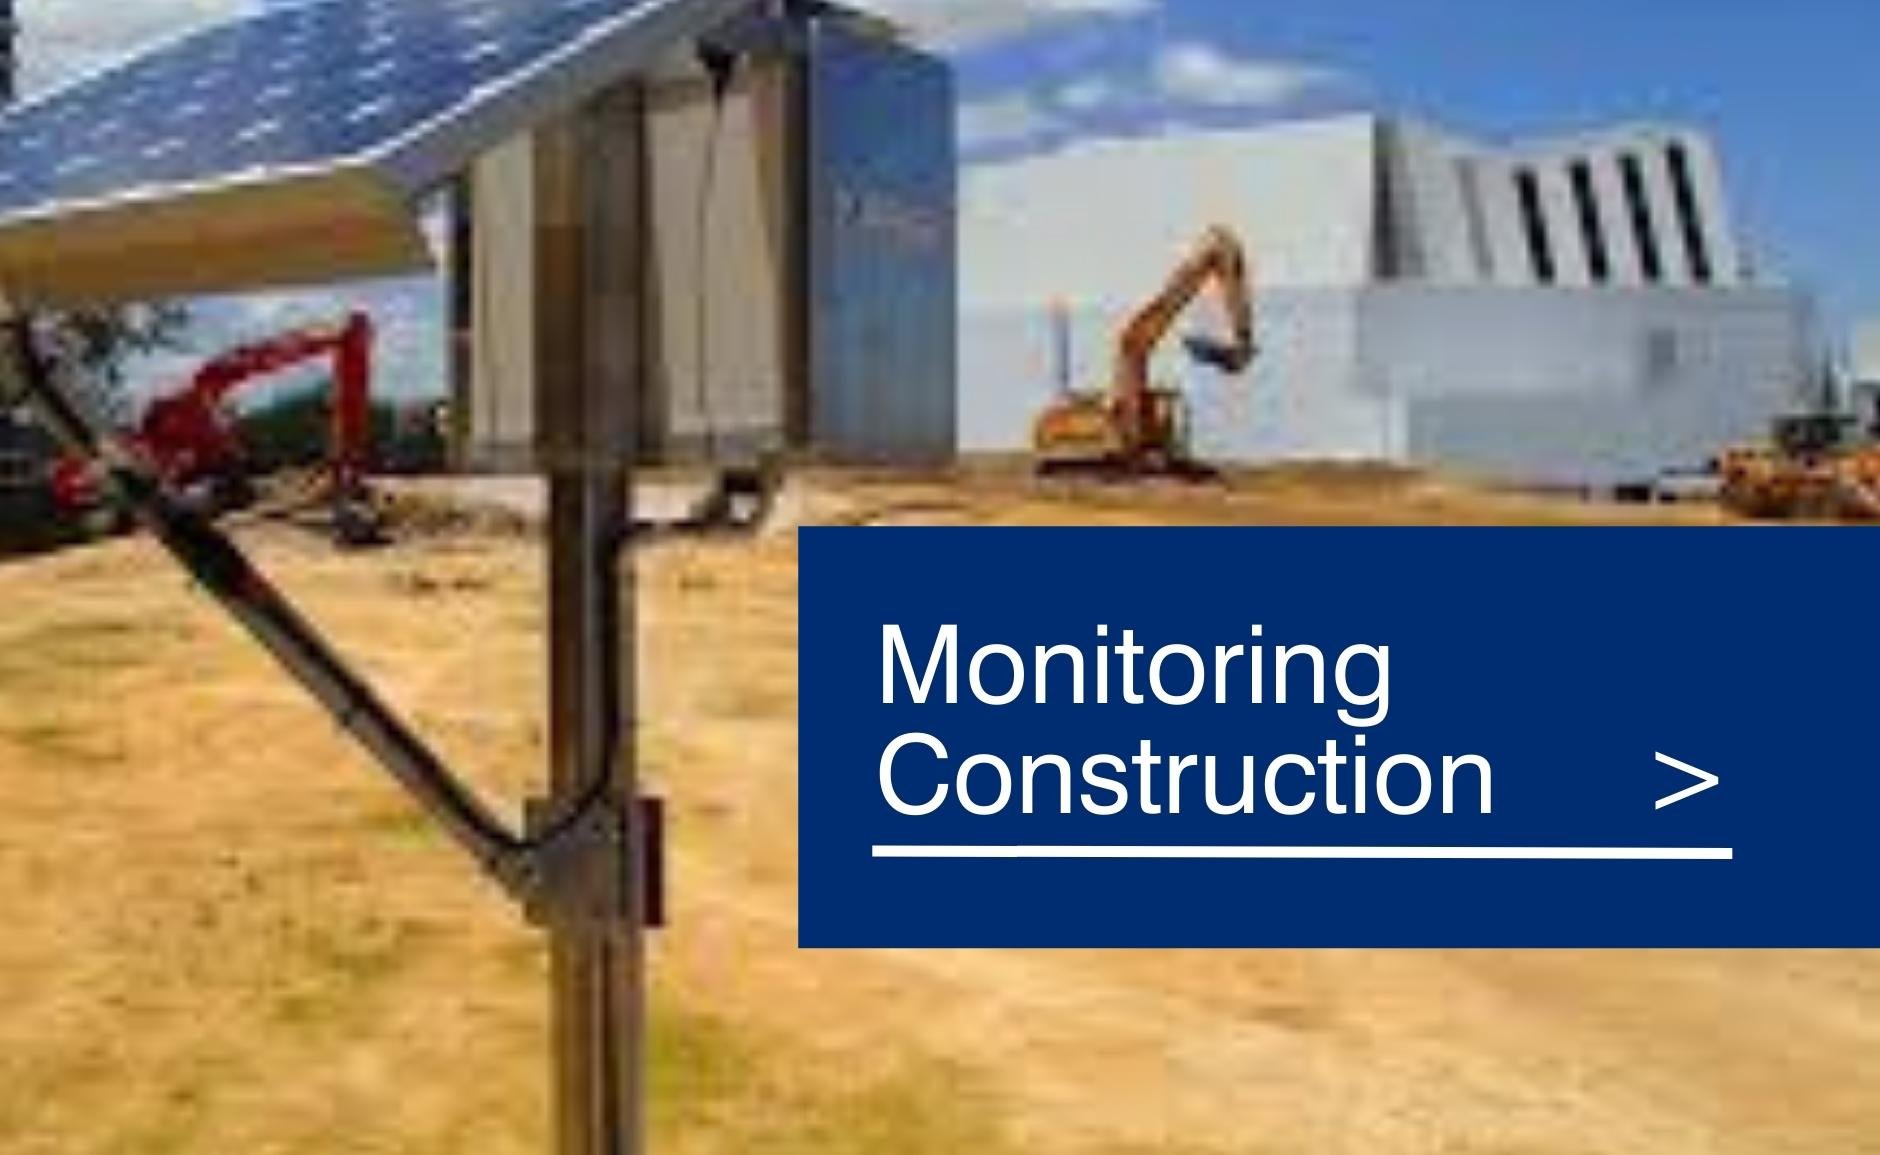 DC Power System Monitoring Construction